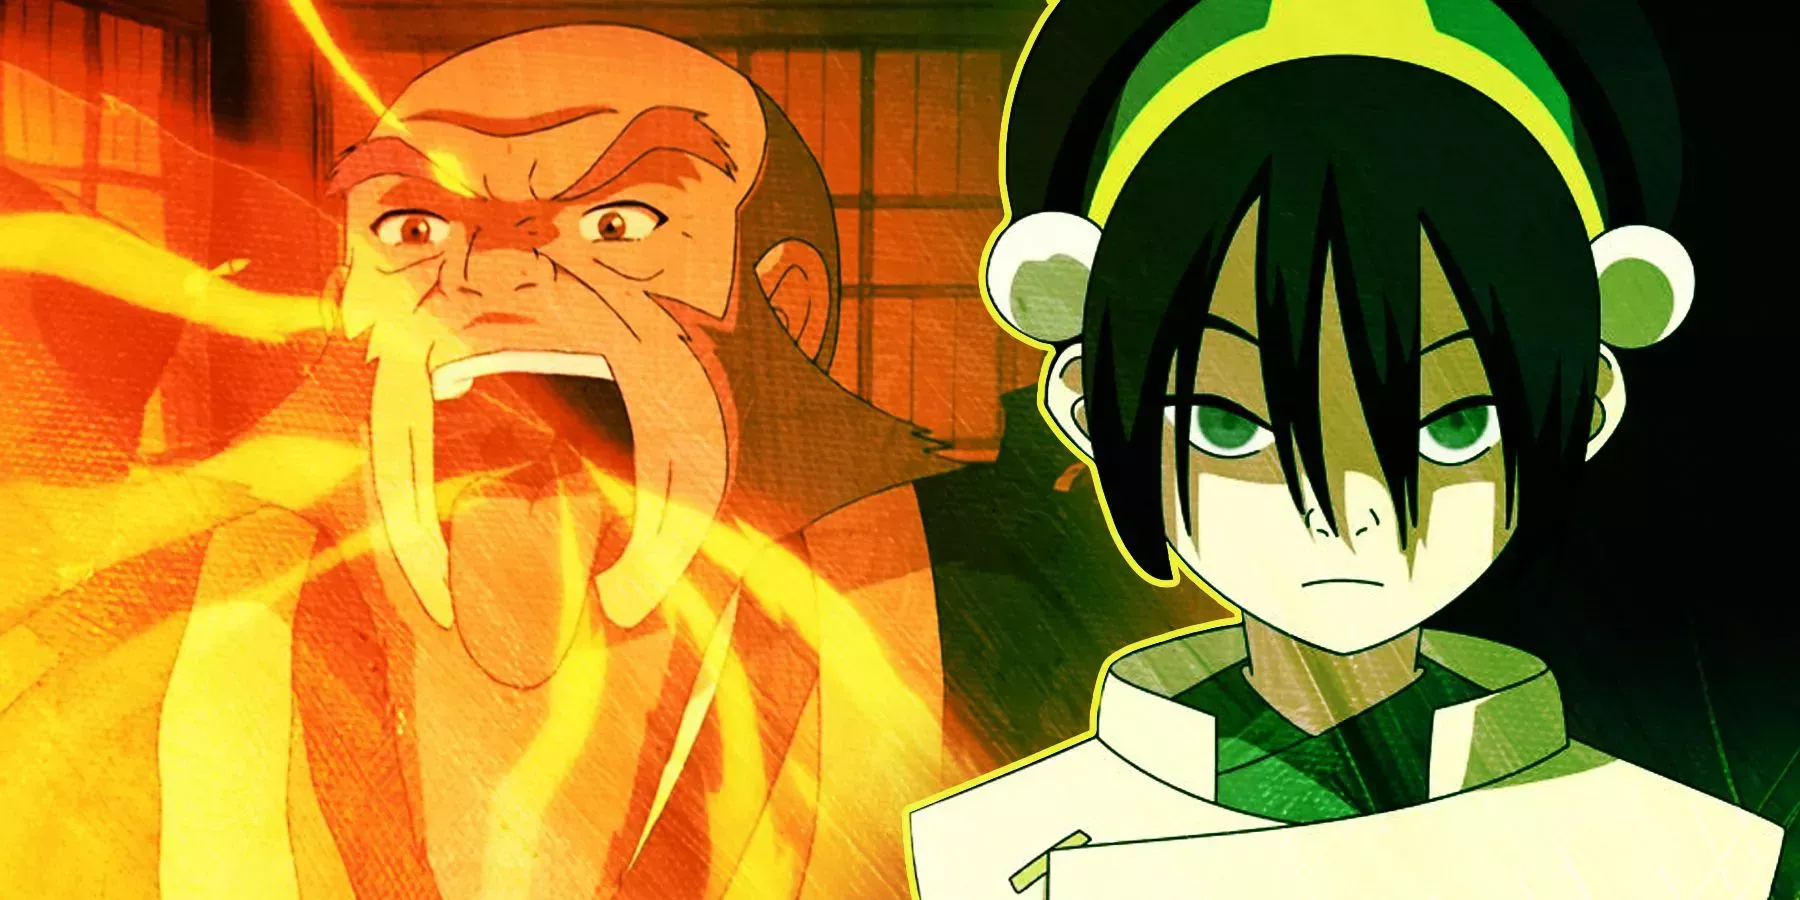 General Iroh and Toph Beifong from show Avatar: The Last Airbender